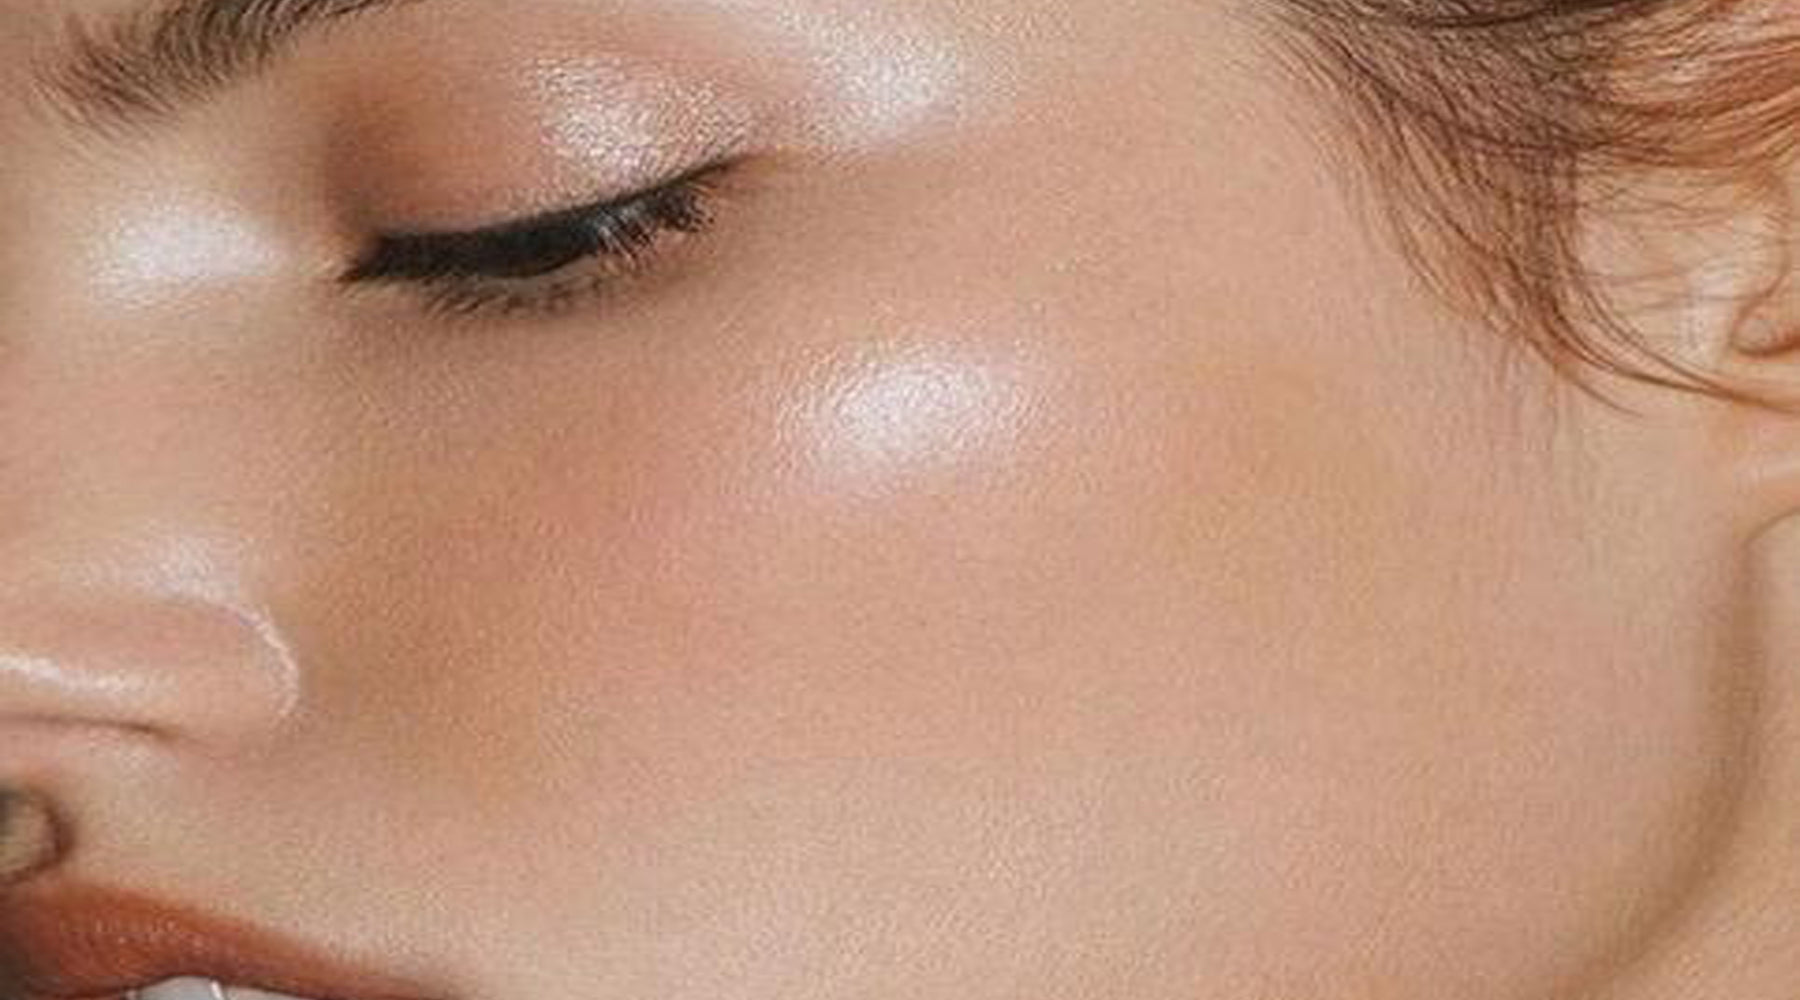 How to get glowing dewy skin?